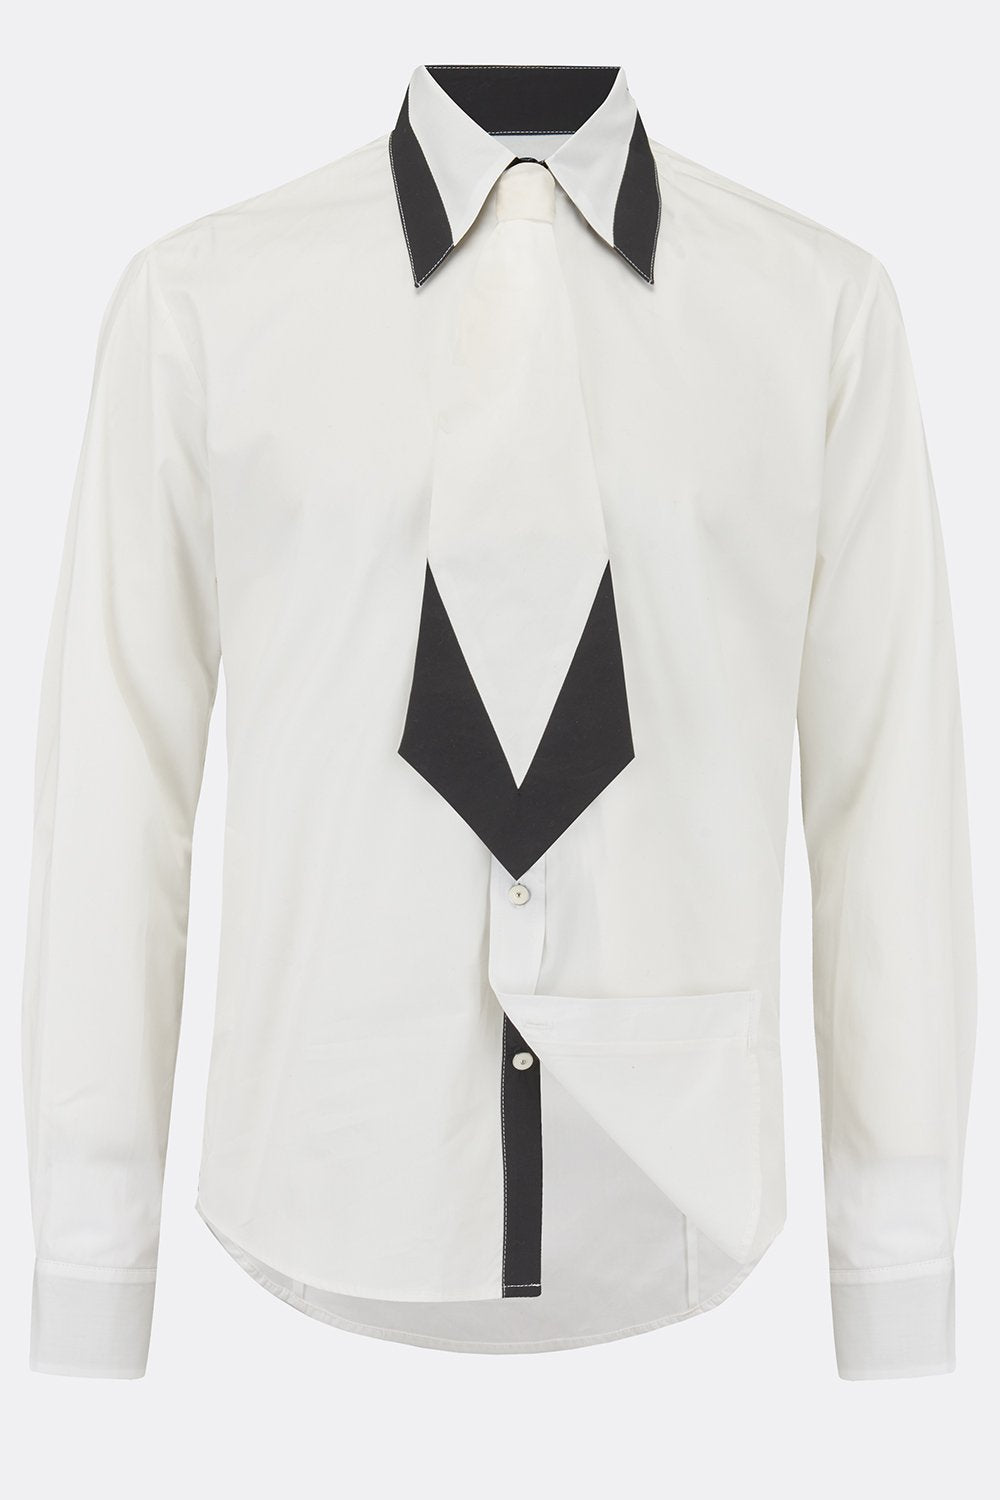 FLOYD SHIRT IN WHITE-menswear-A Child Of The Jago